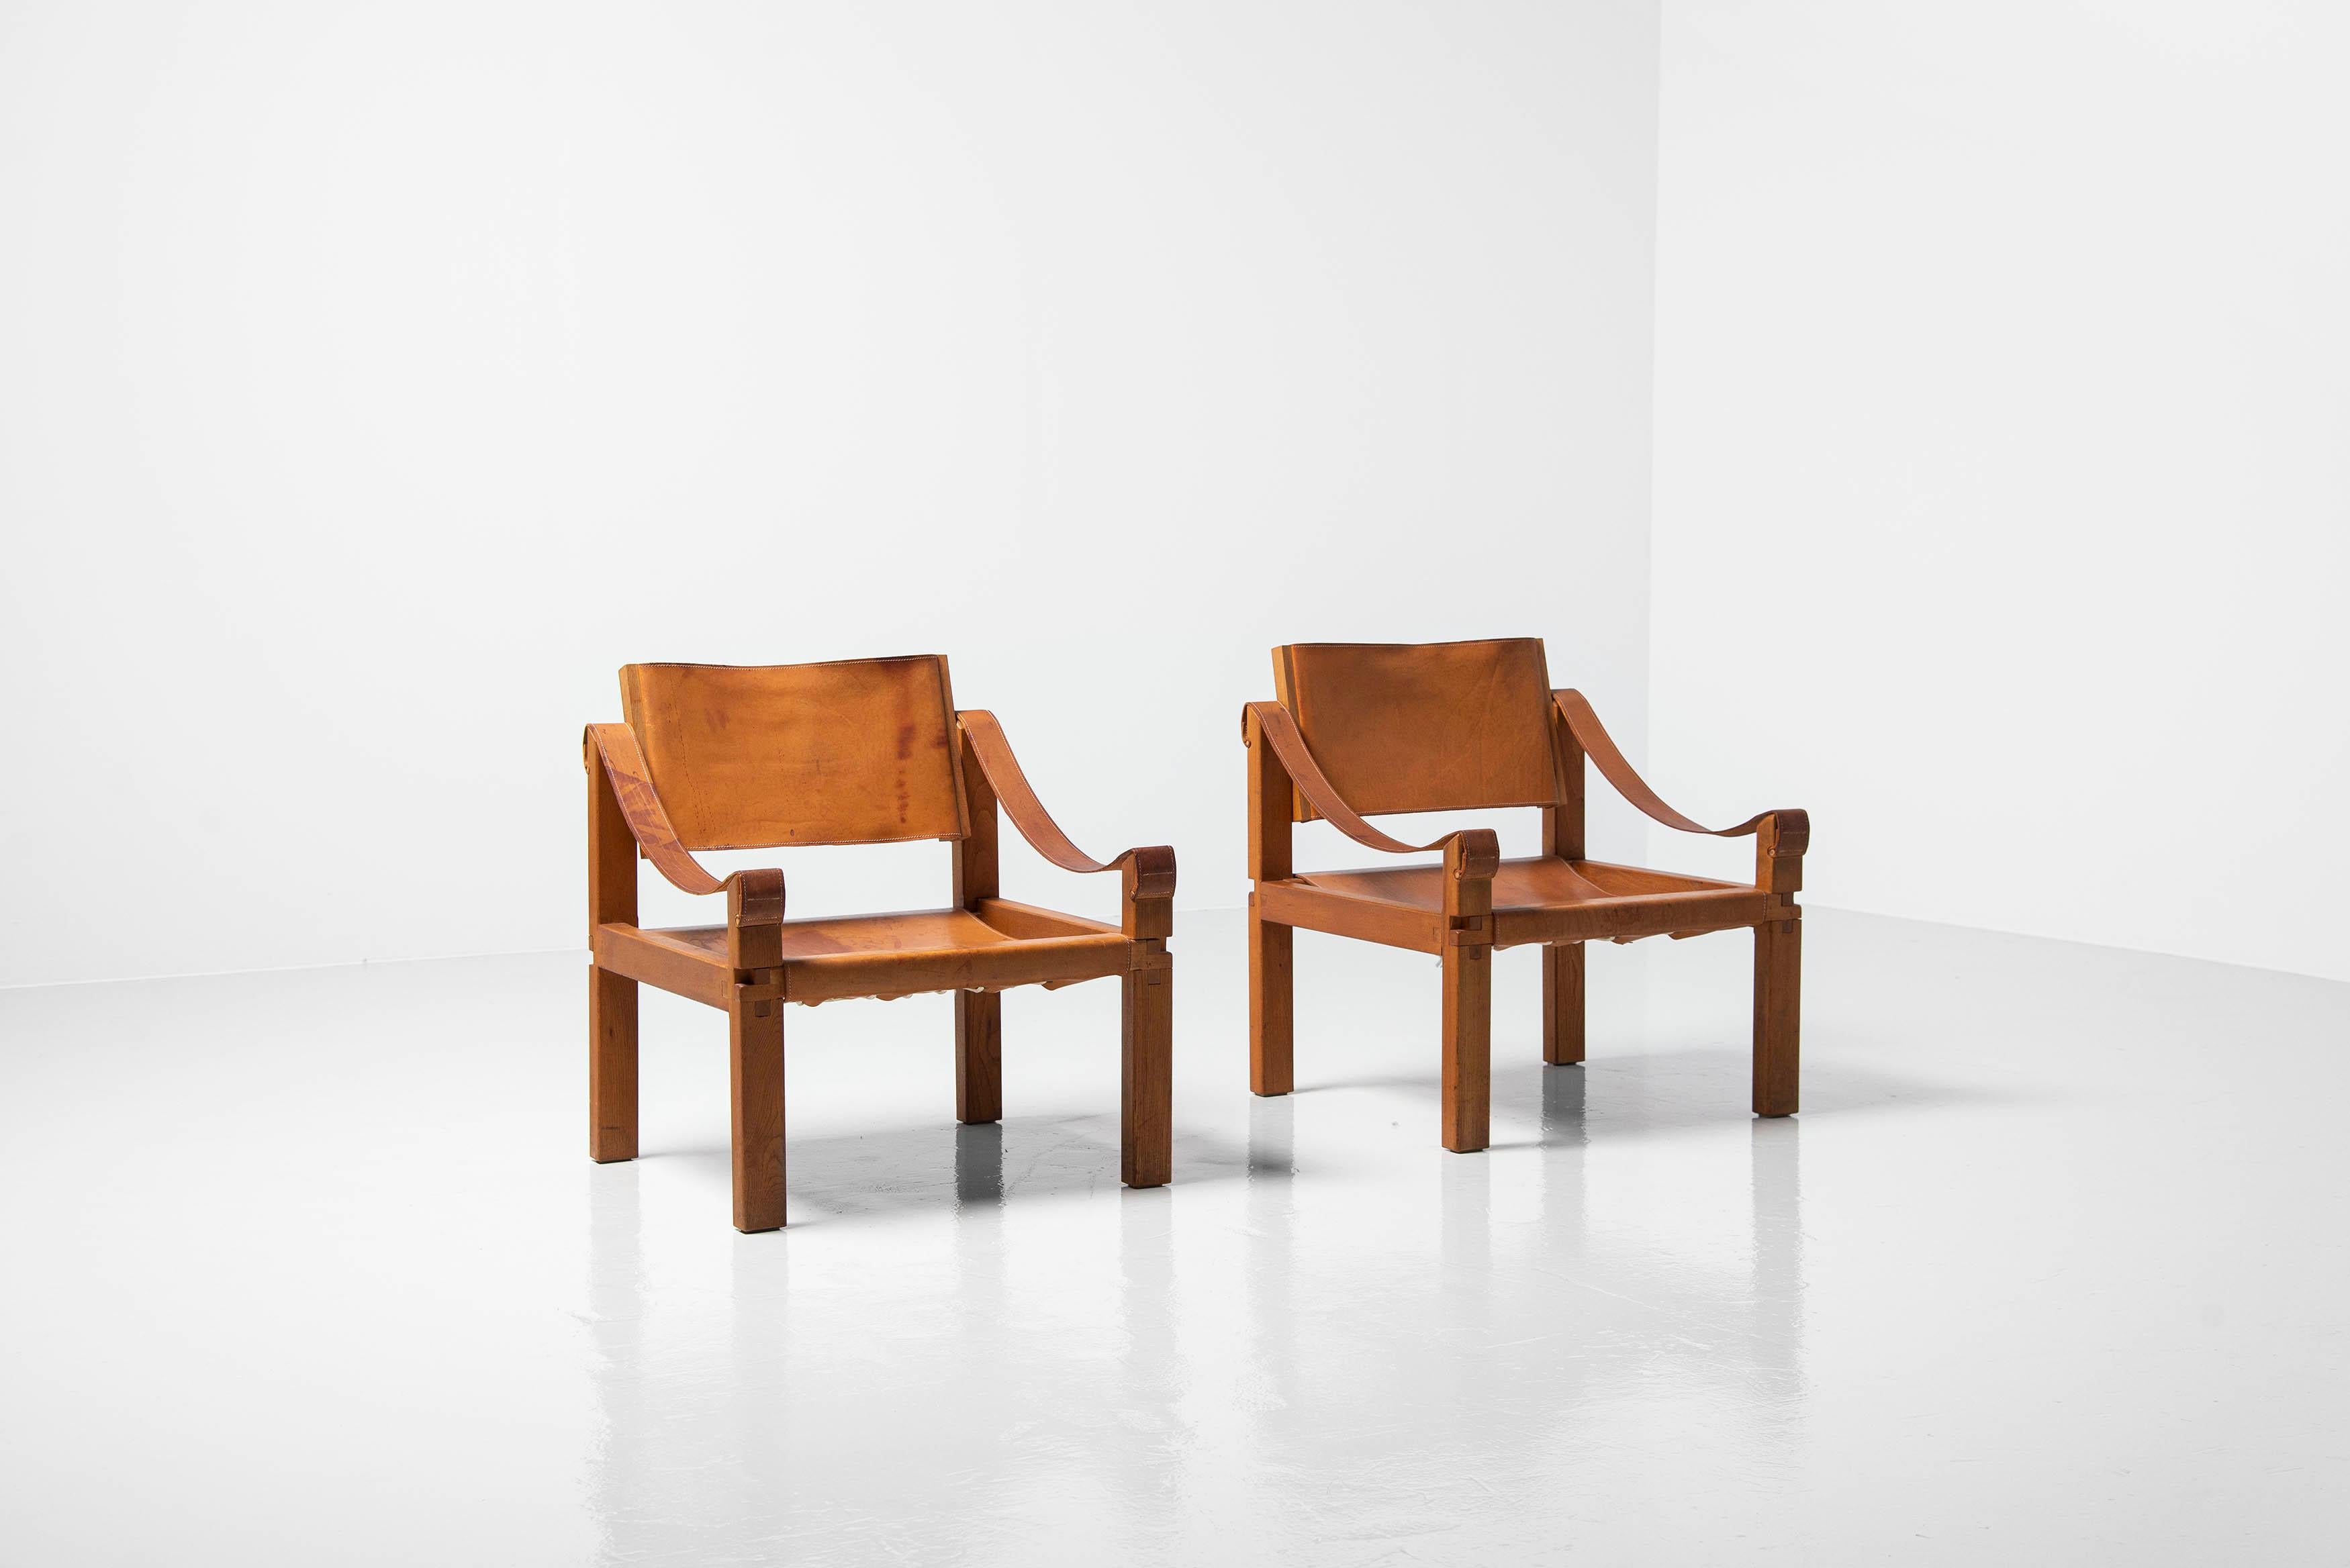 Stunning pair of S10 lounge chairs designed by Pierre Chapo and manufactured in his own atelier in France, 1964. These chairs have a solid elm wooden frame which has an exquisite detailed structure which is refined with his trademark mortise and